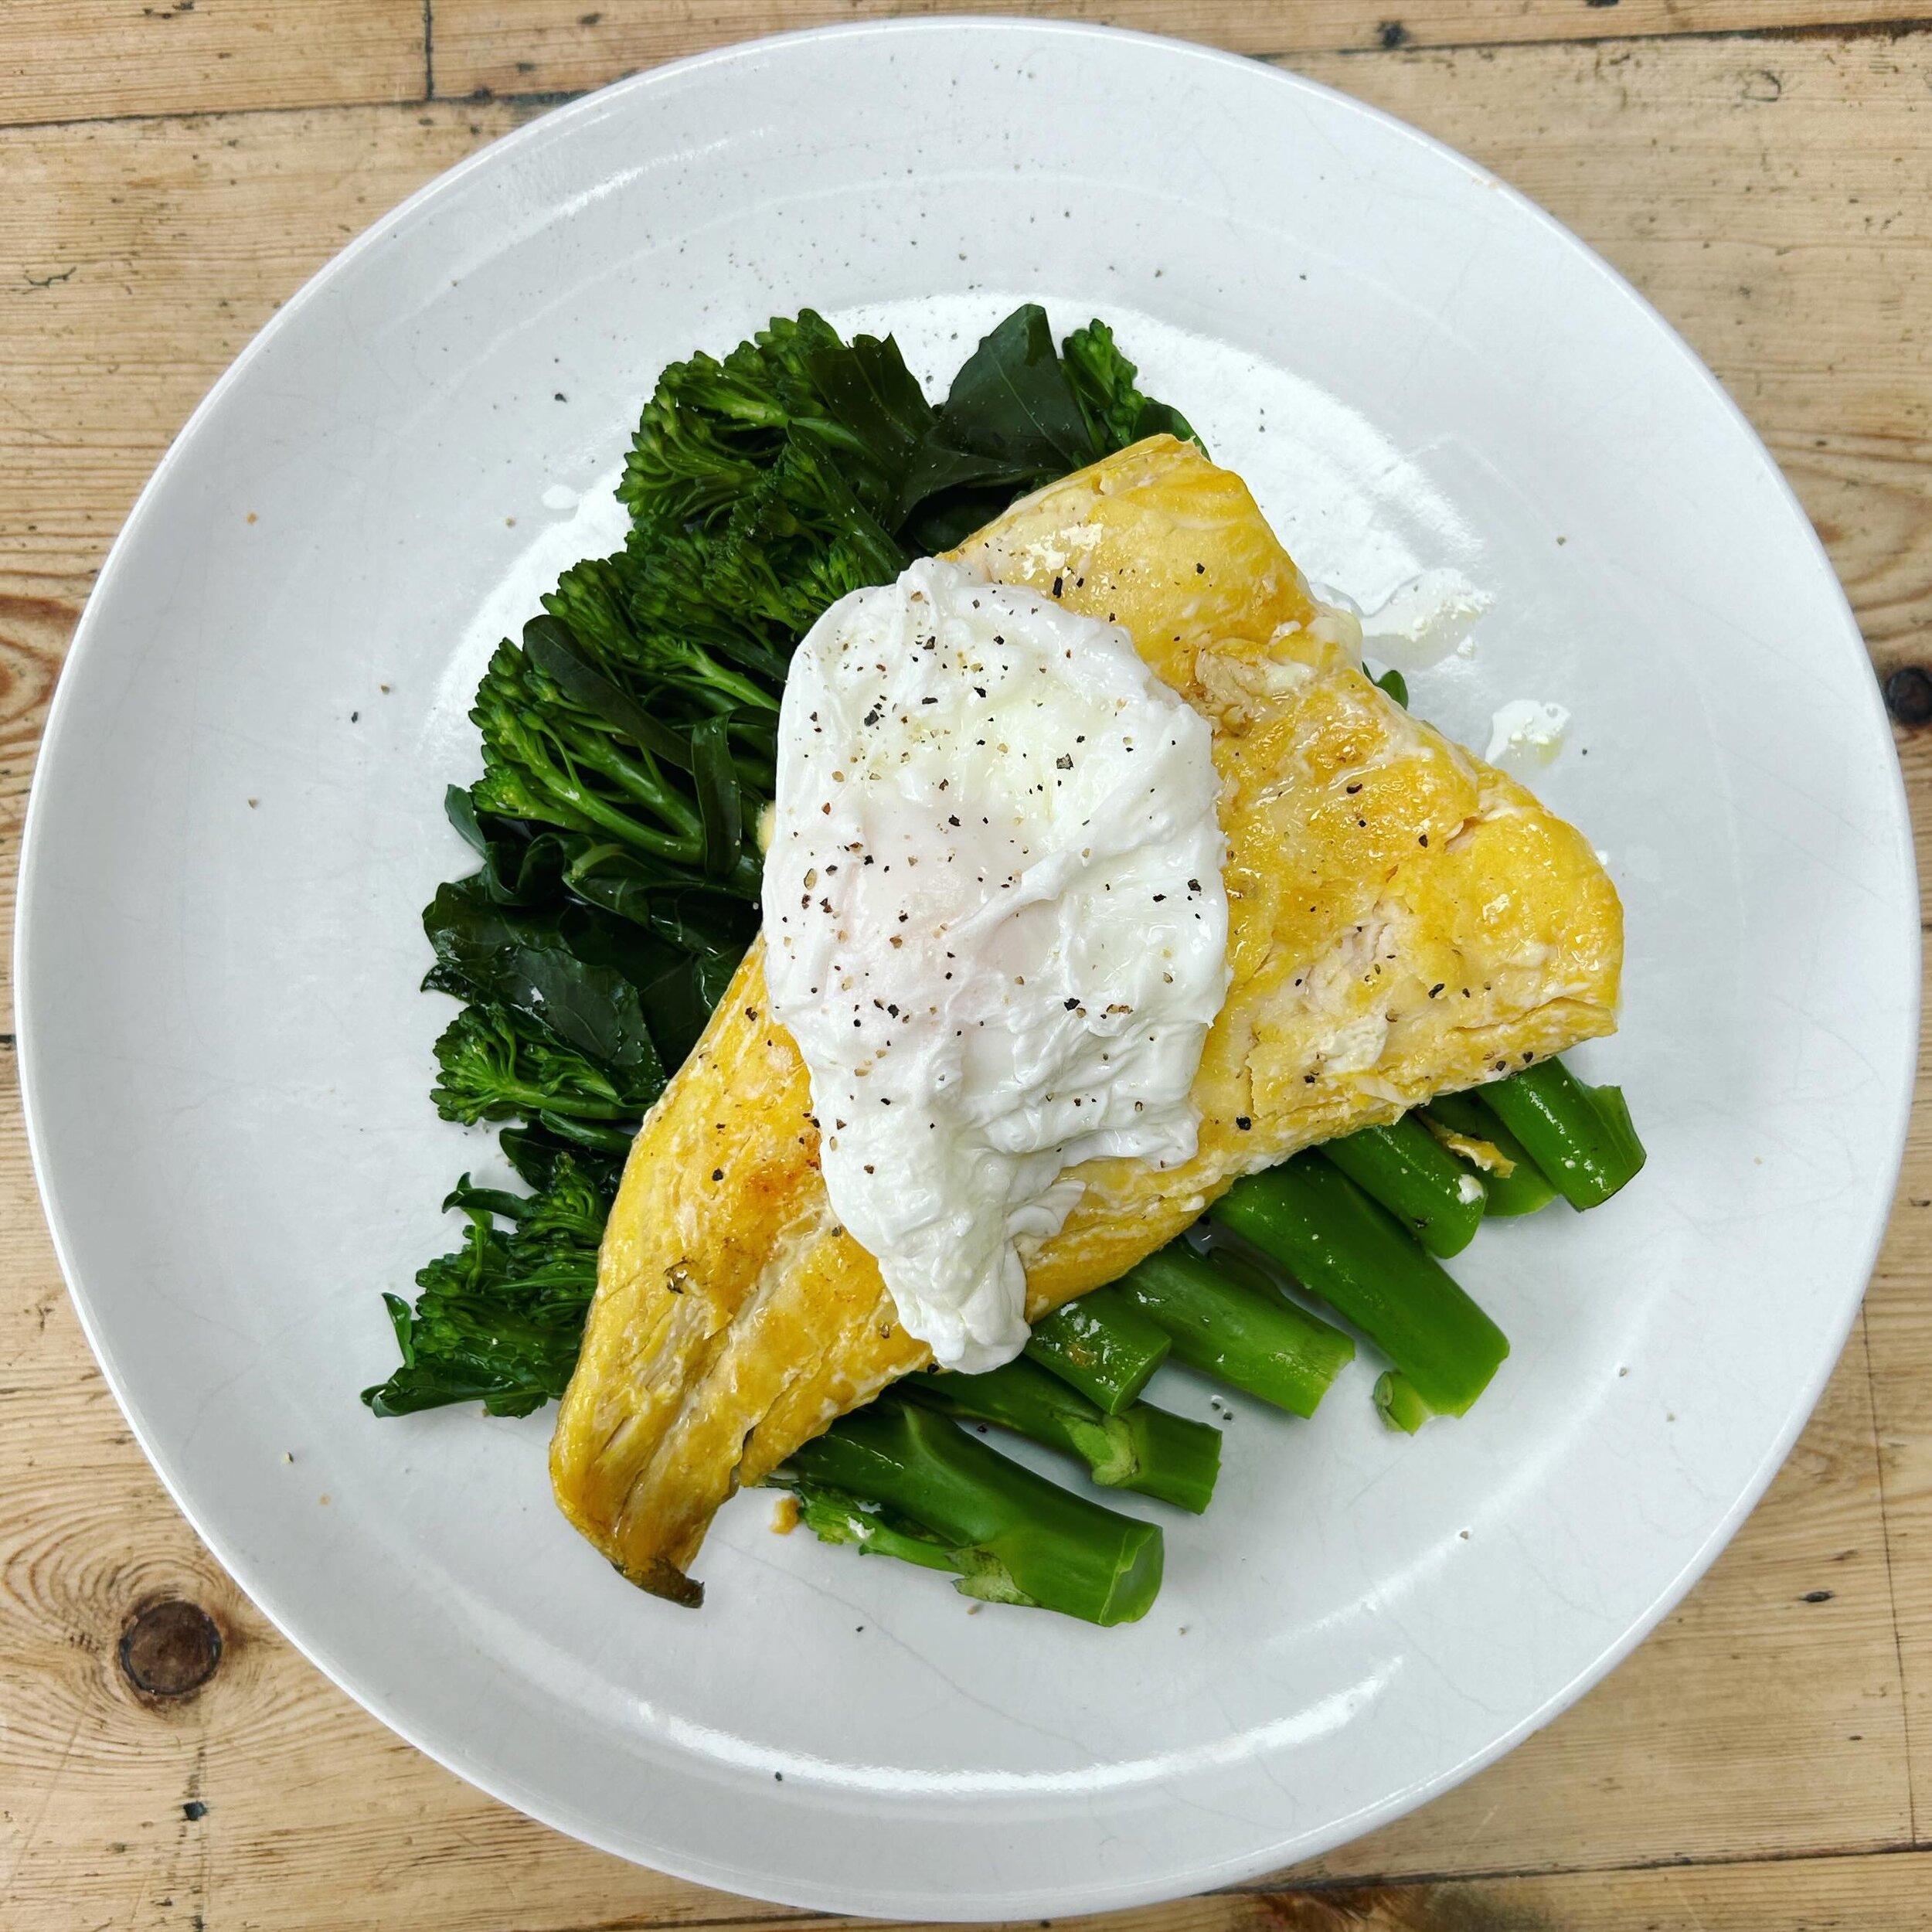 I just had a conversation with one of my lovely clients about fish, during which I shared what I&rsquo;d eaten for my breakfast today. OK, I had it a 11.30am, so it&rsquo;s more of a brunch, but even so, it&rsquo;s possibly not what many would consid